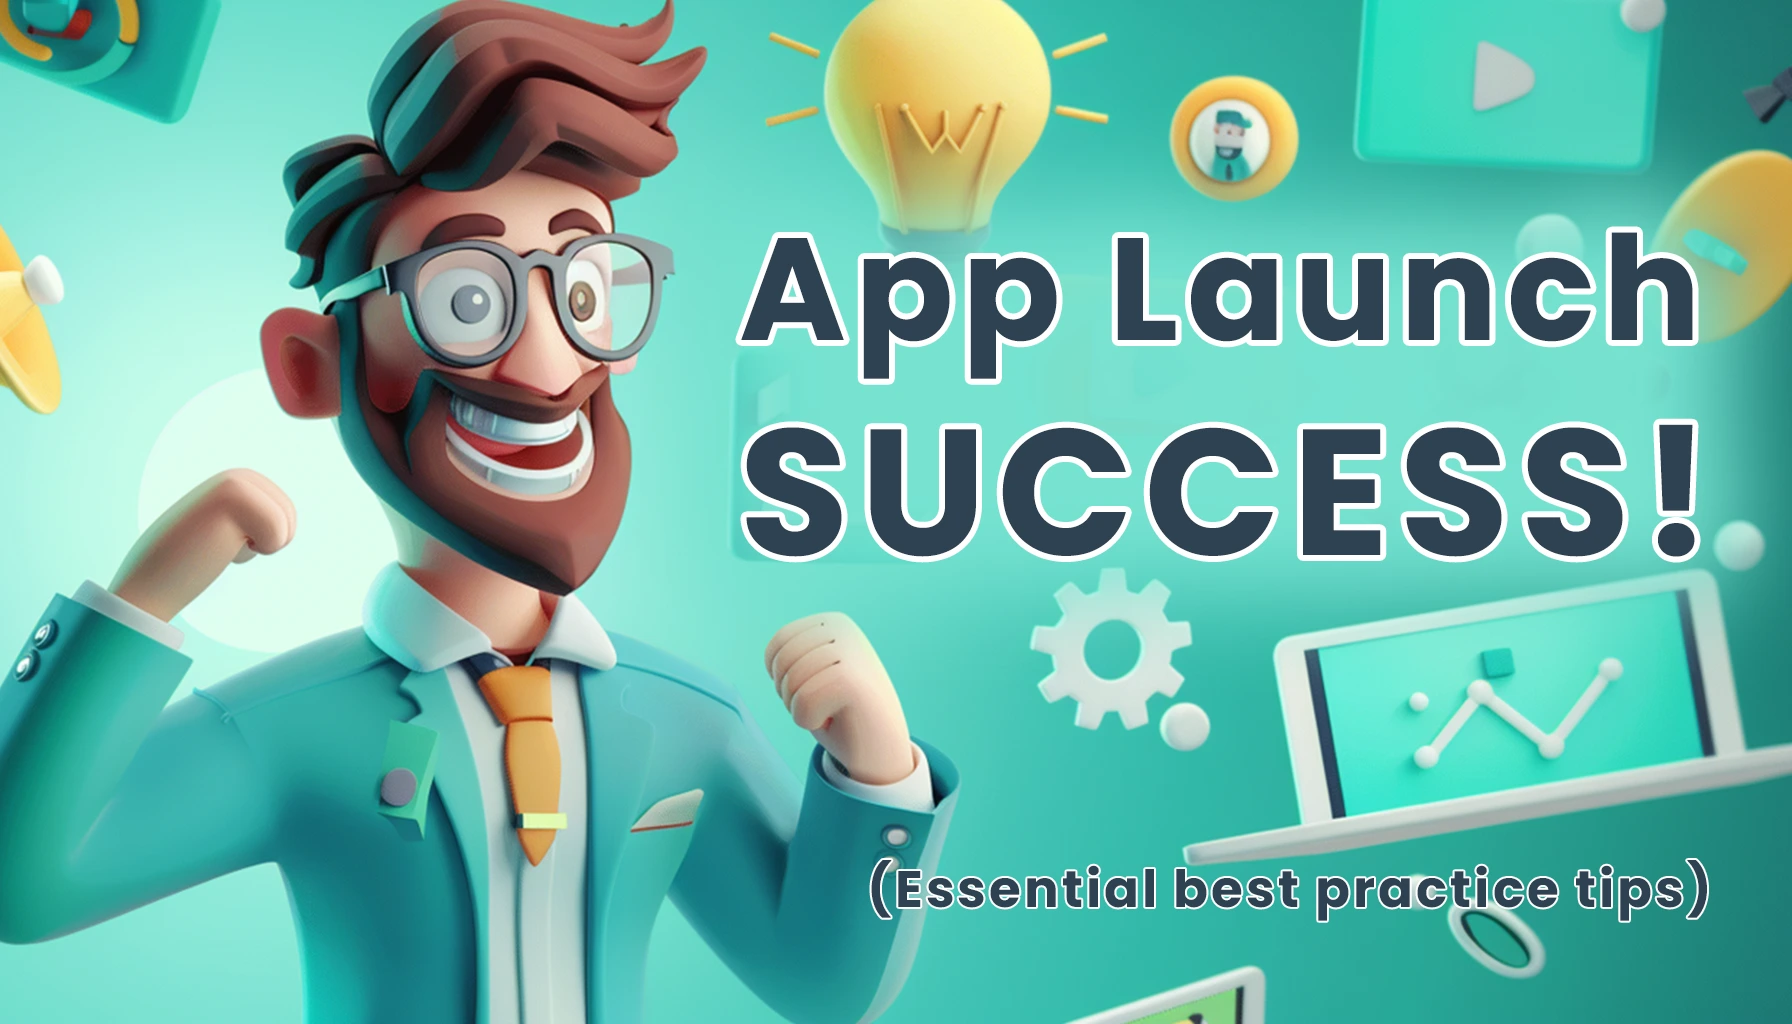 App Launch Best Practices, Tips & Tricks - App Launch Checklist for Releasing Successful Apps! post image